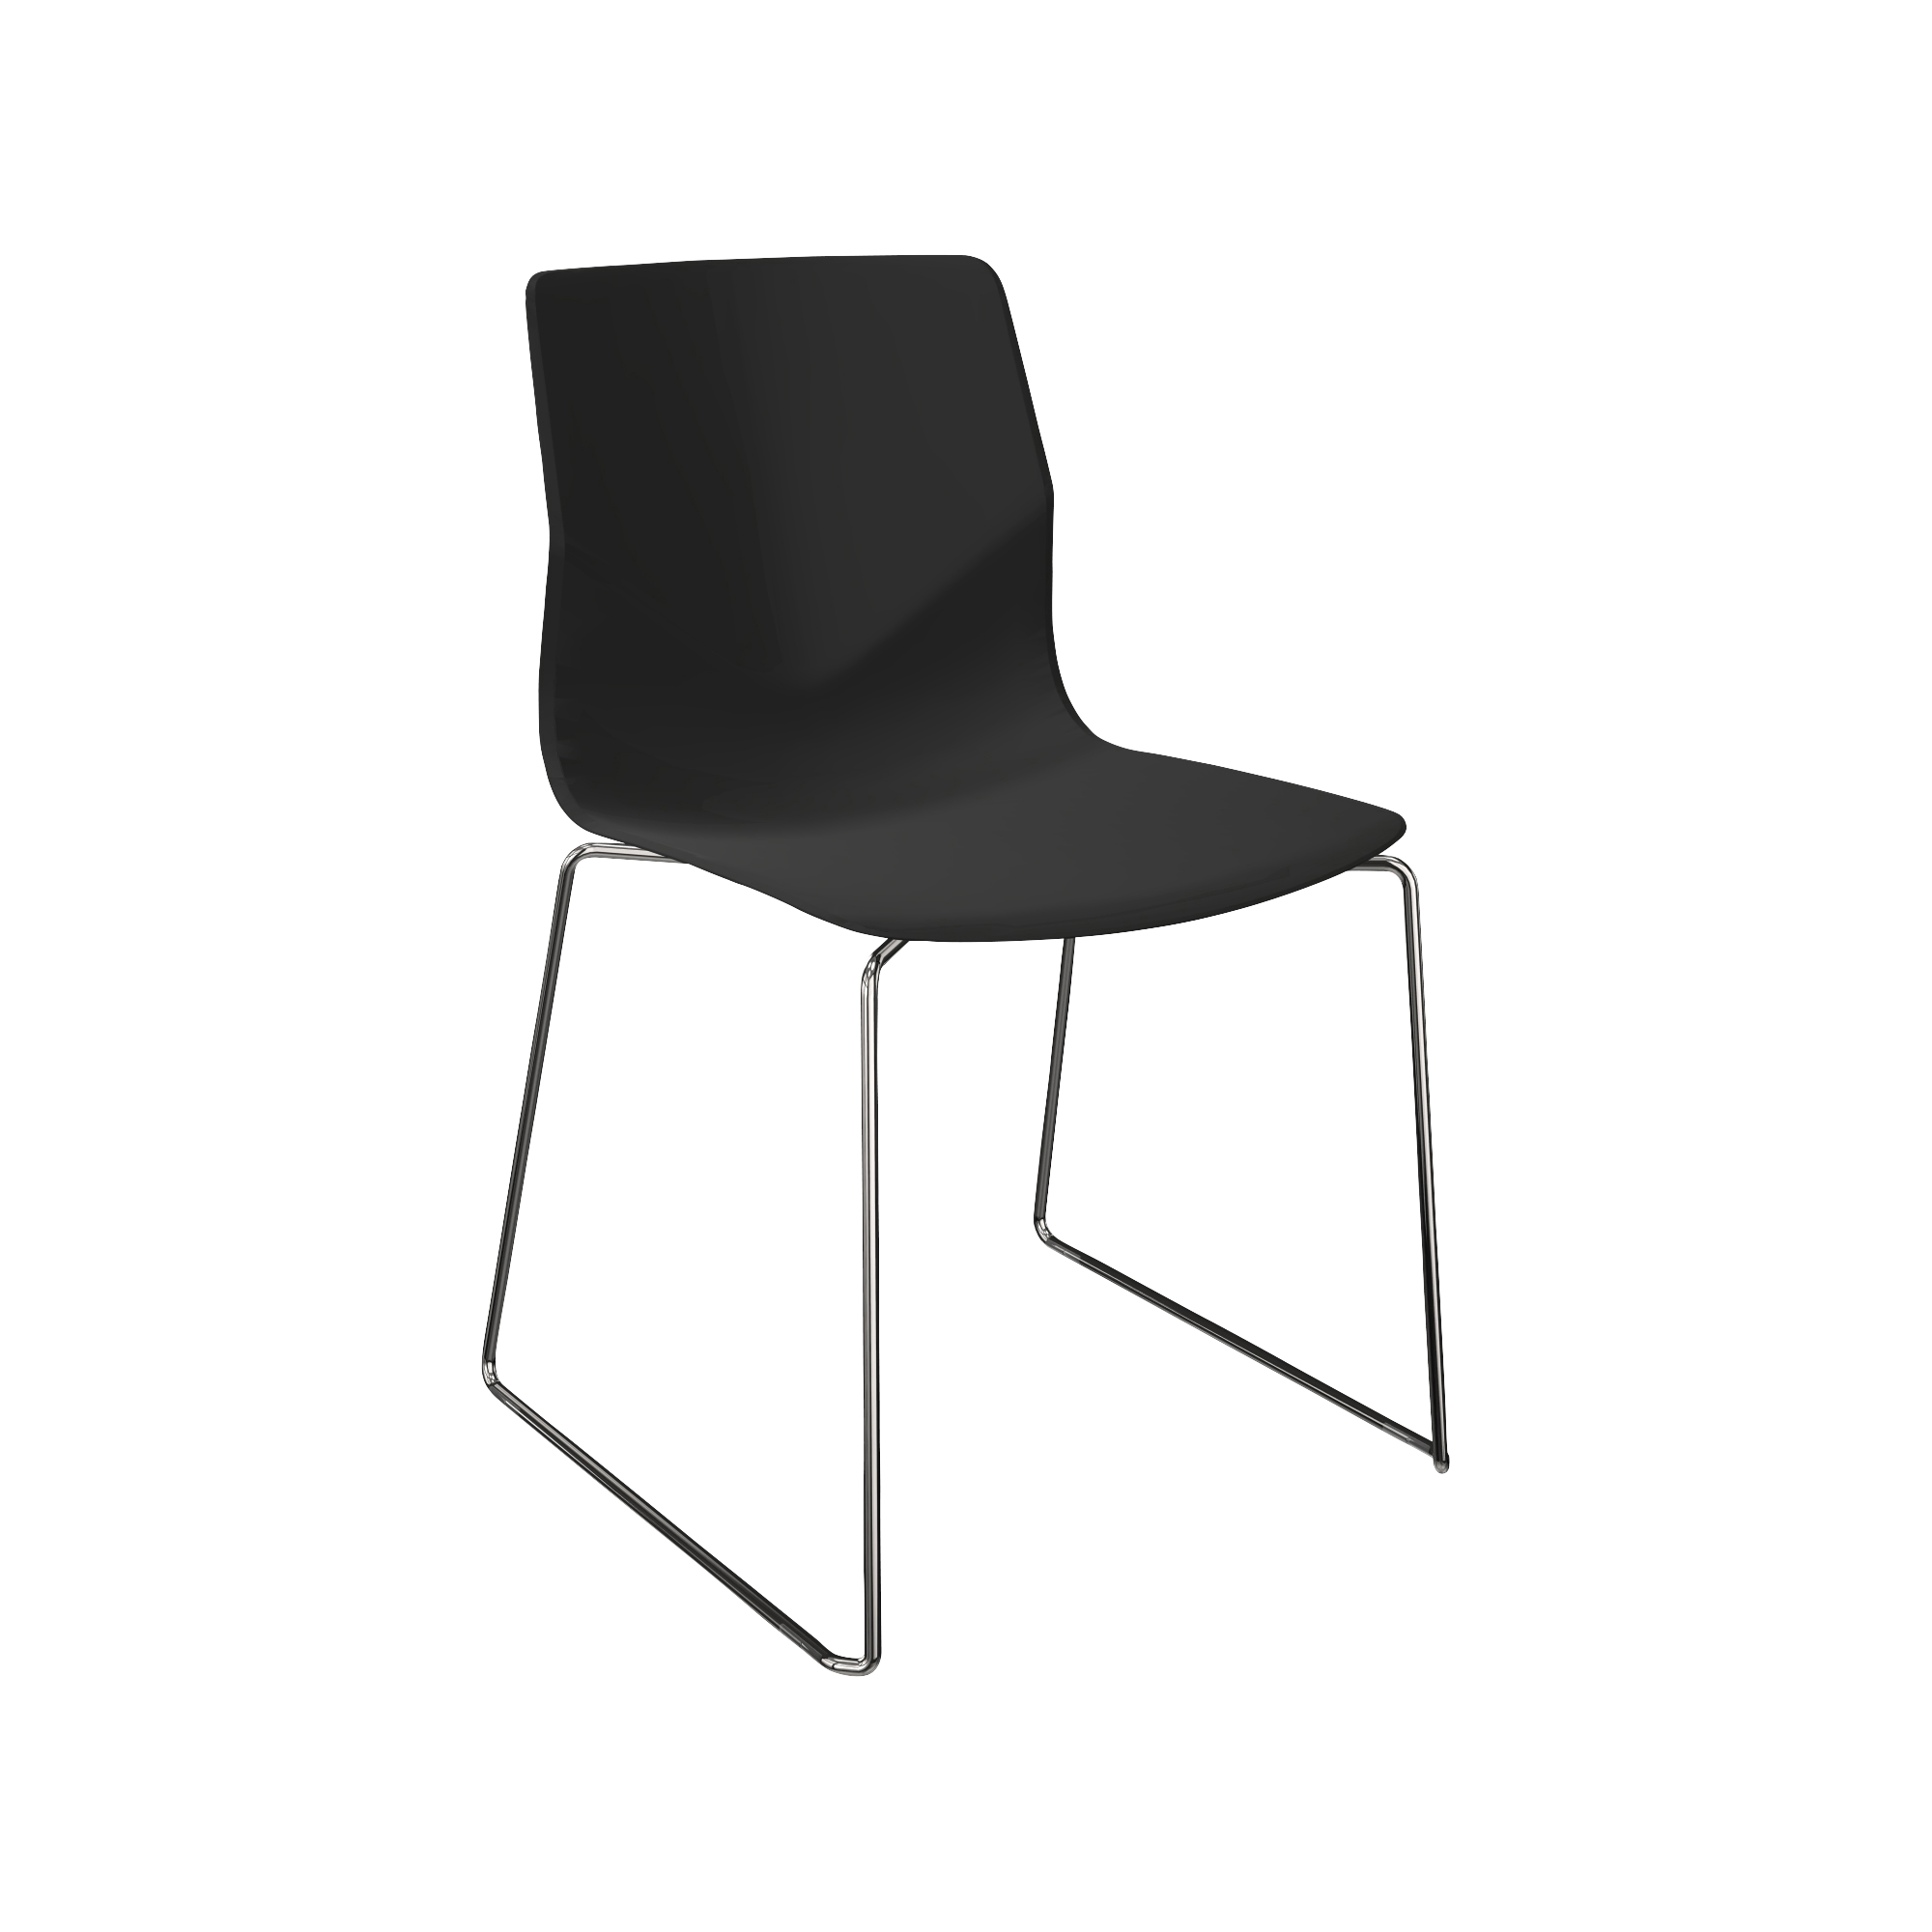 A black chair with a metal frame